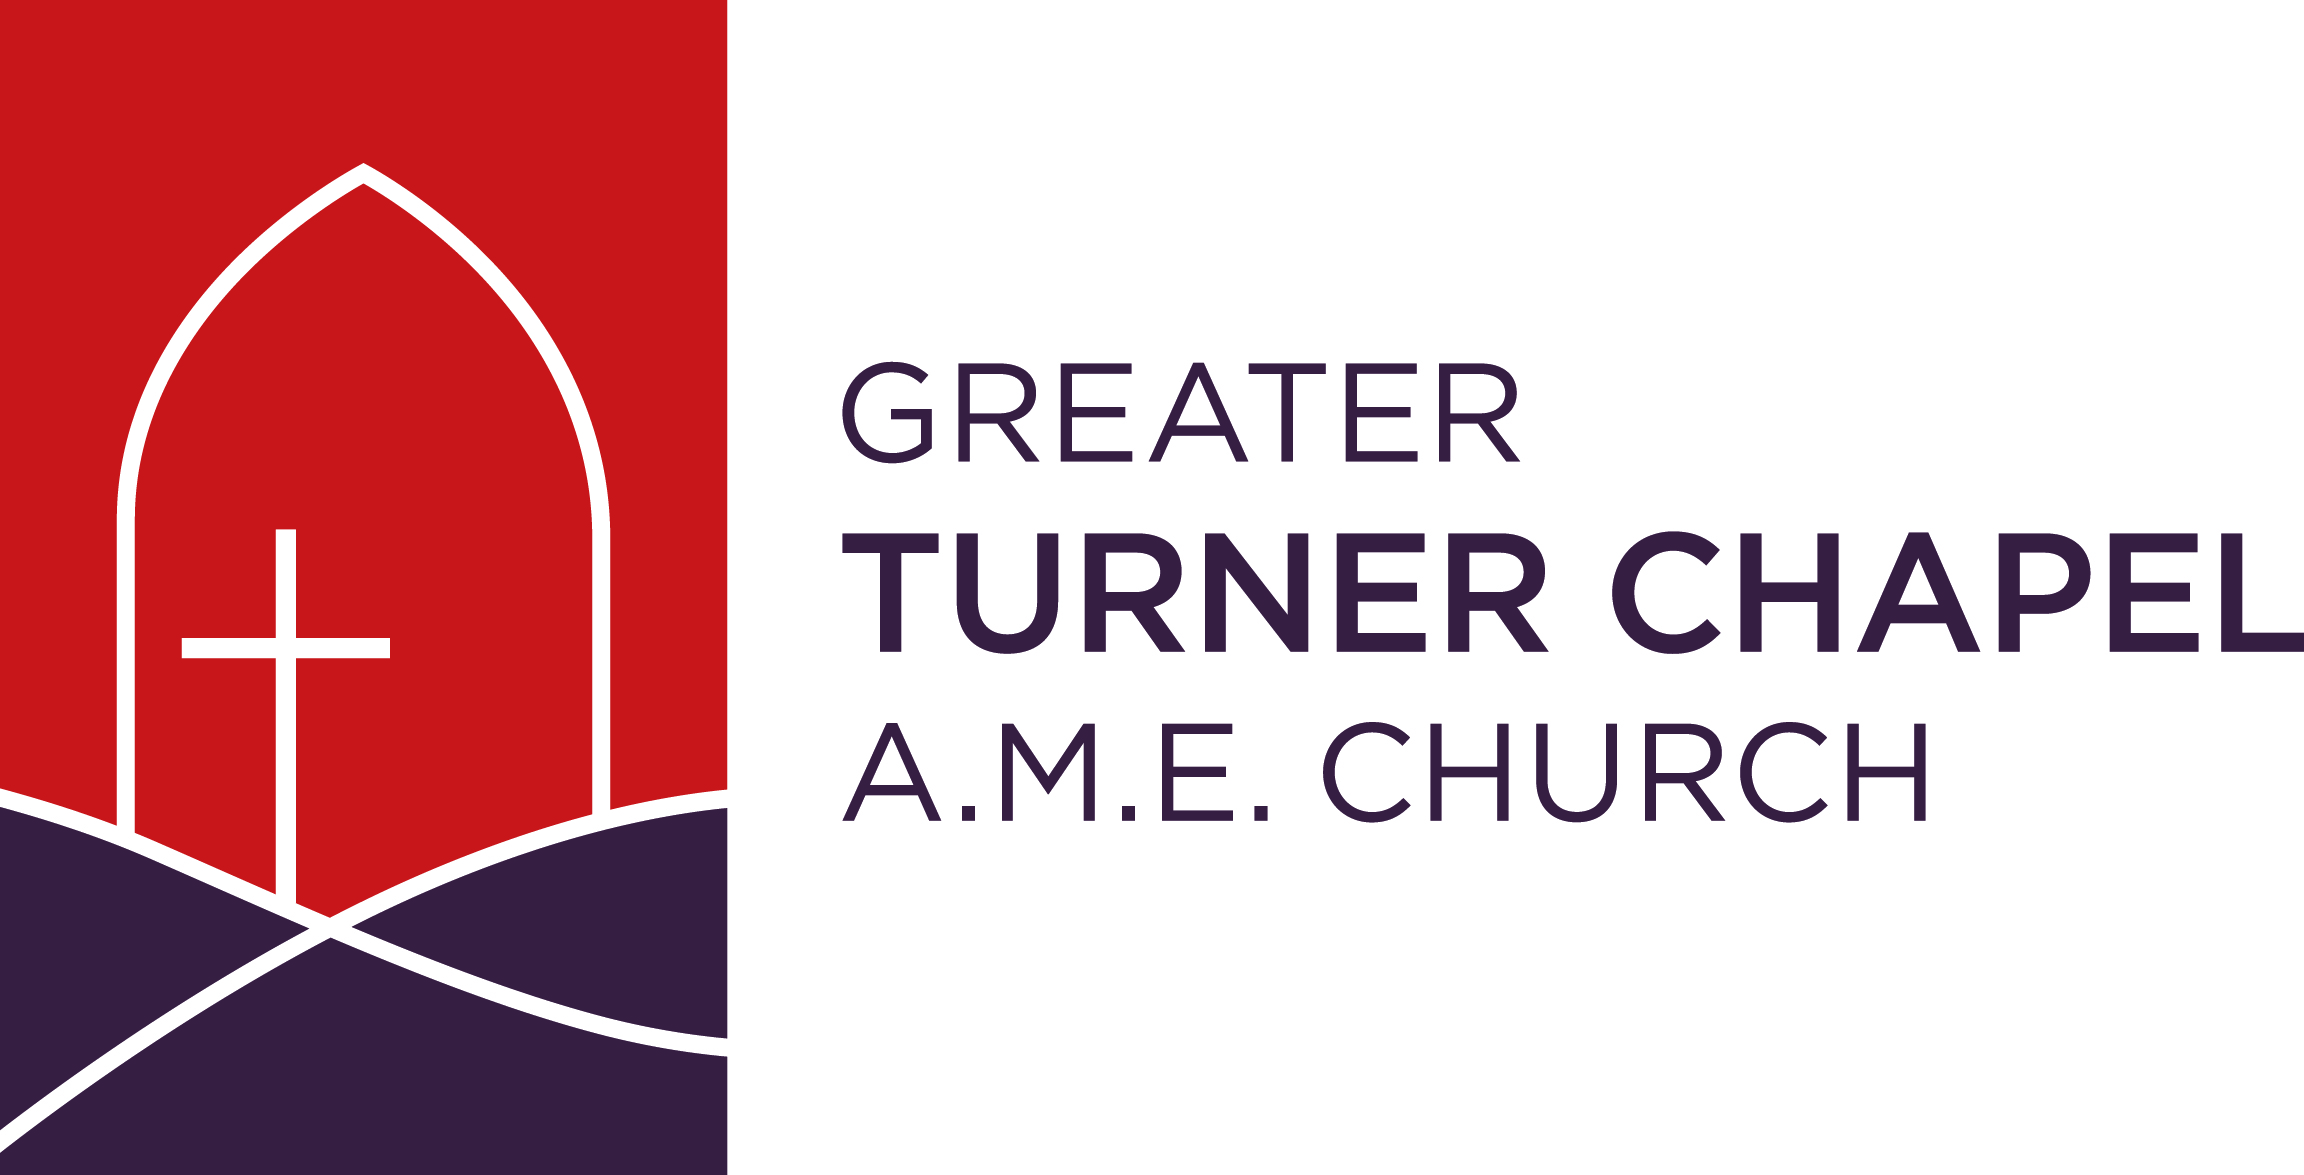 Greater Turner Chapelame Church